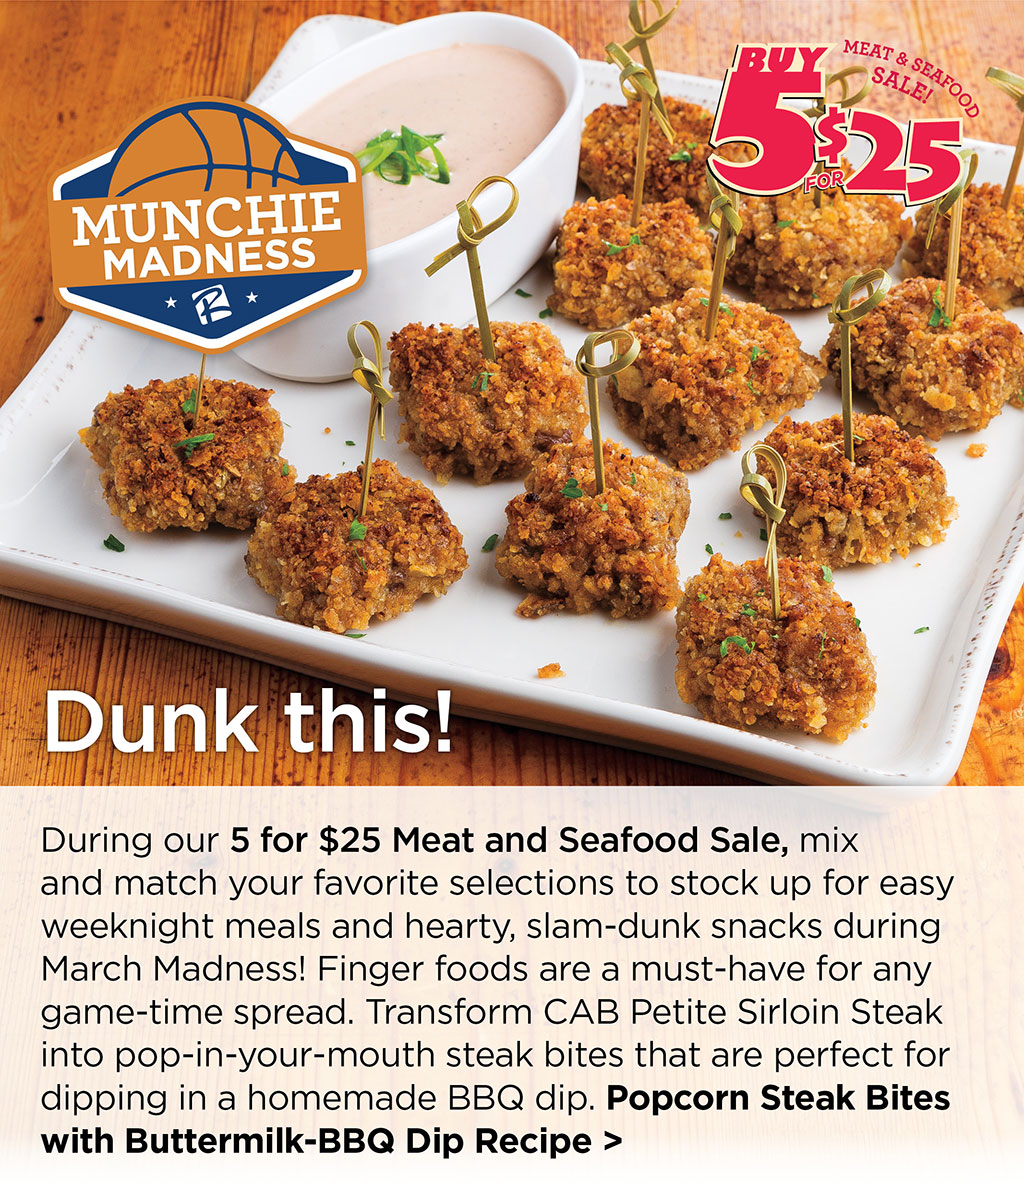 Dunk this! - During our 5 for $25 Meat and Seafood Sale, mix and match your favorite selections to stock up for easy weeknight meals and hearty, slam-dunk snacks during March Madness! Finger foods are a must-have for any game-time spread. Transform CAB Petite Sirloin Steak into pop-in-your-mouth steak bites that are perfect for dipping in a homemade BBQ dip. Popcorn Steak Bites with Buttermilk-BBQ Dip Recipe >